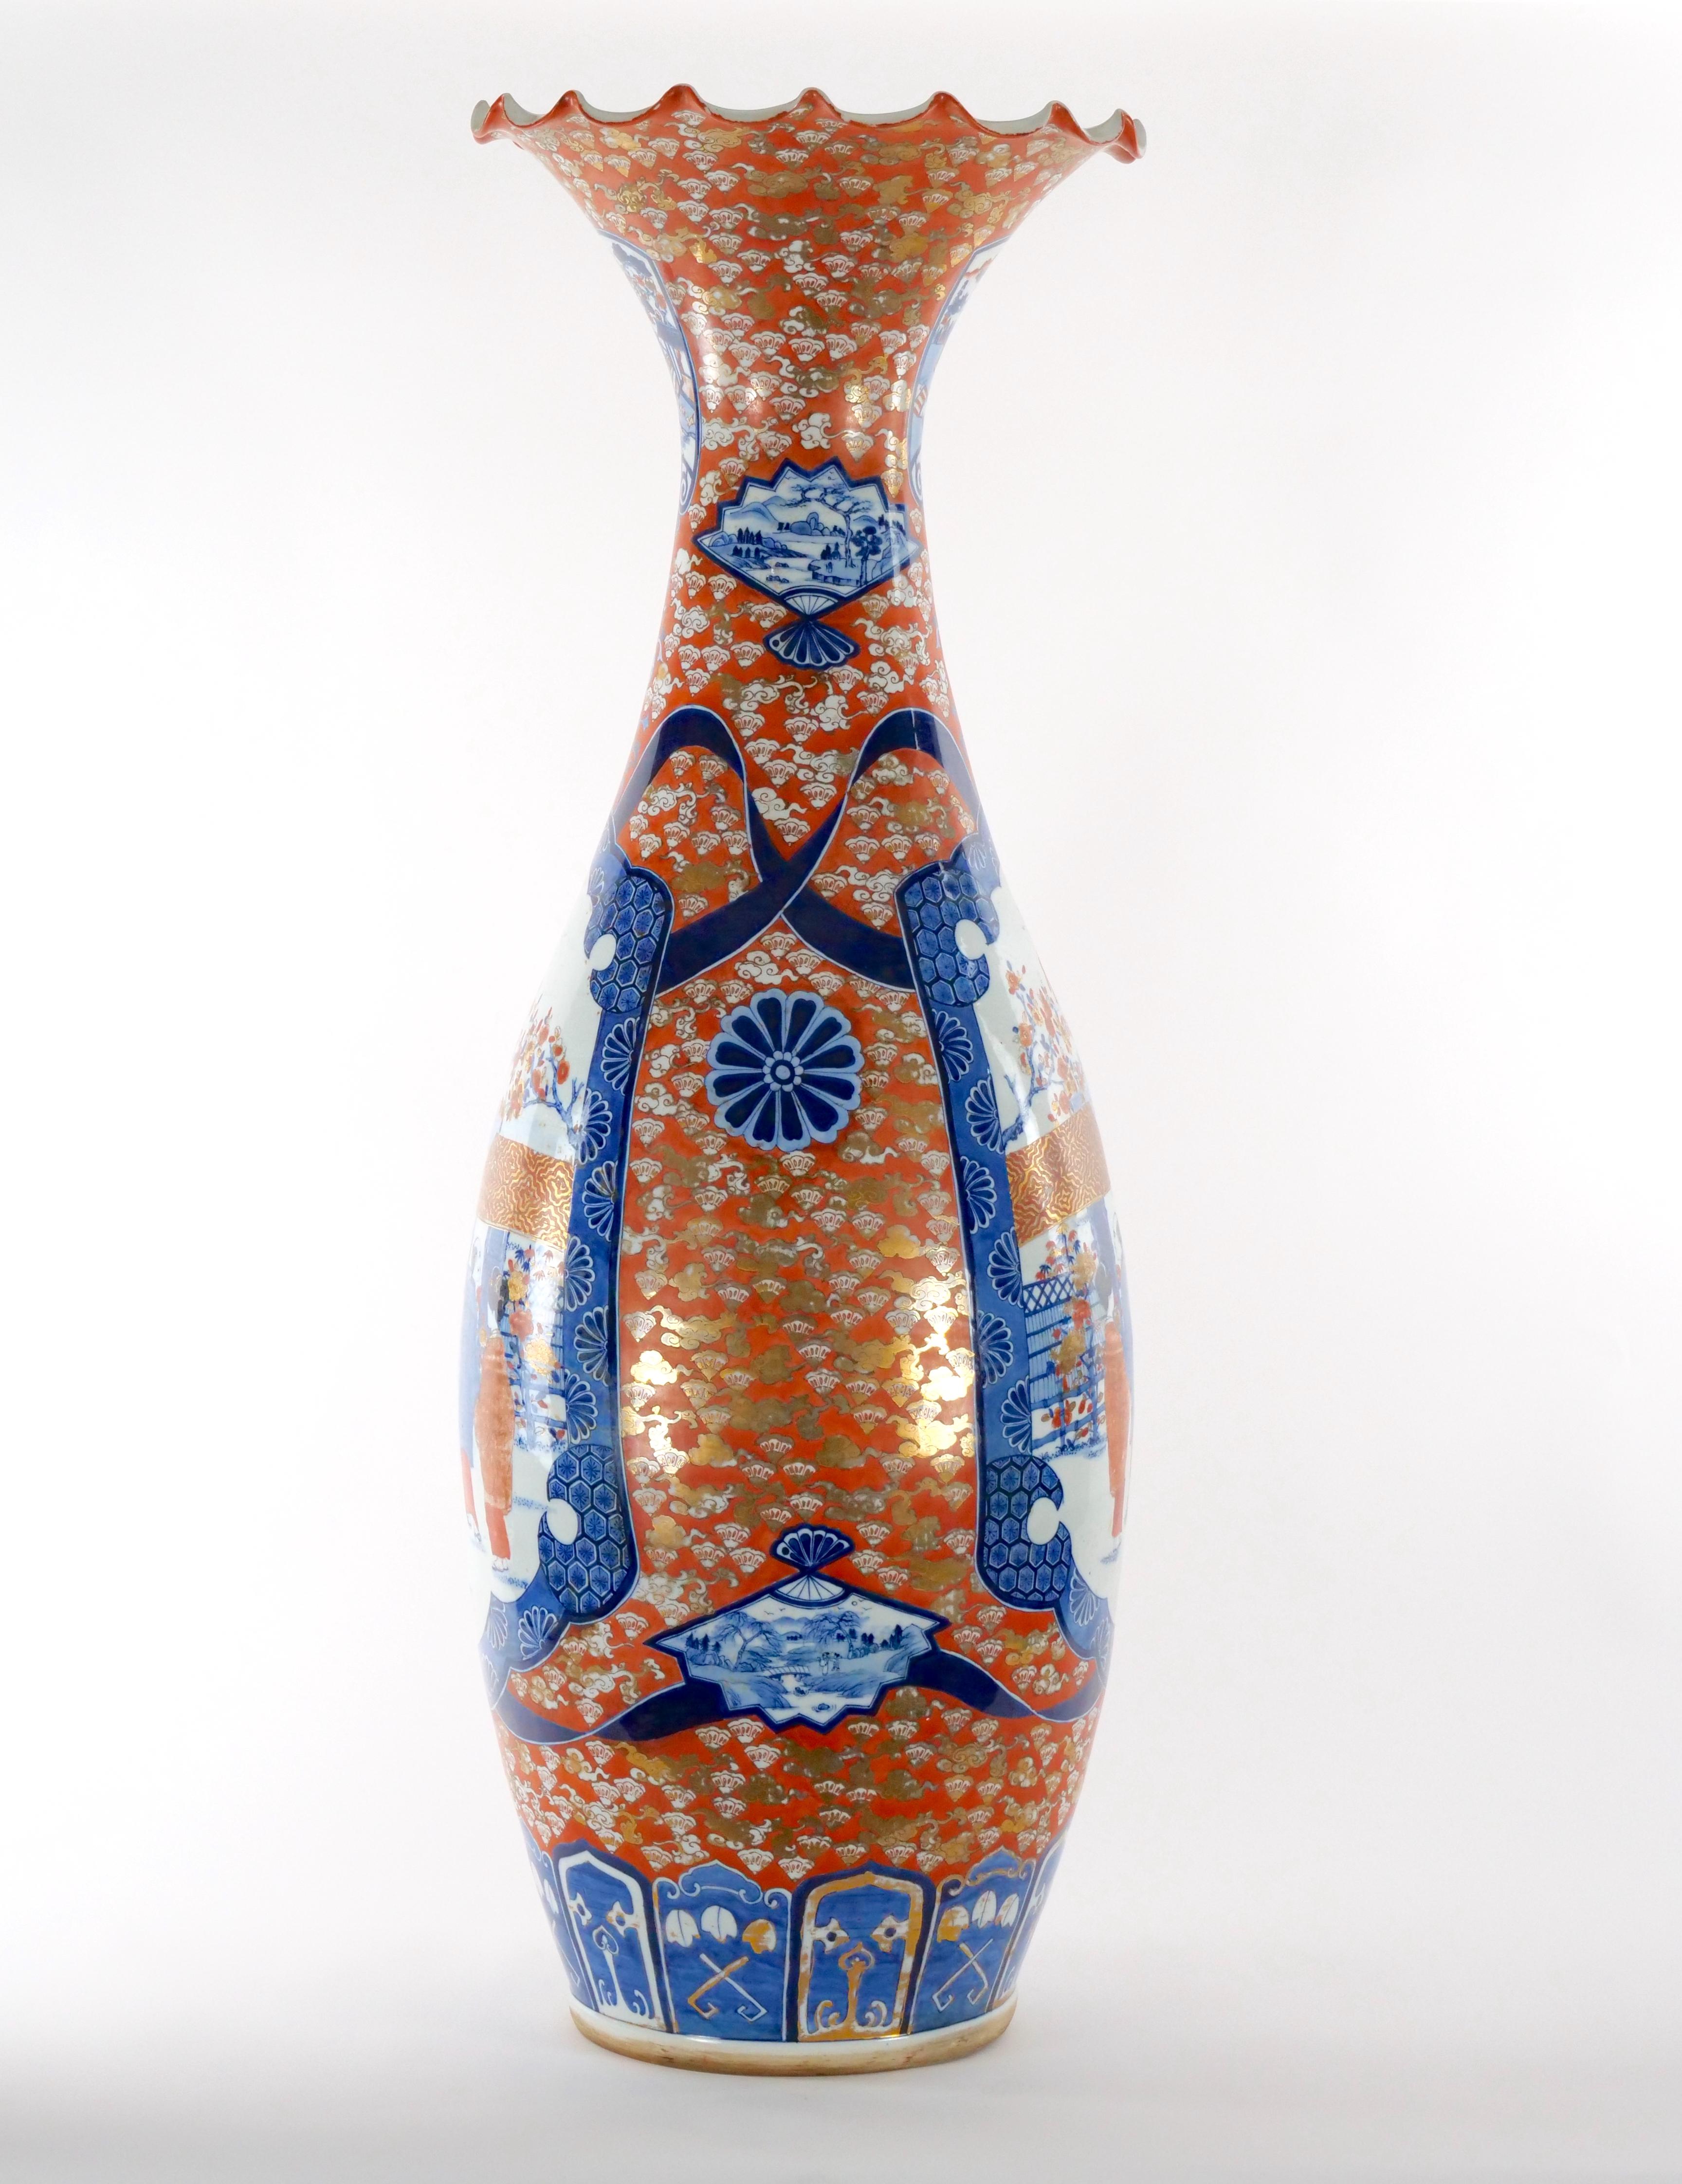 Monumental flori-form trumpet decorative floor vase in the Imari decorated porcelain. The floor vase features baluster to the neck flares to a rippled edge. Each side of the body is decorated in blue and red accented by white featuring asiatic